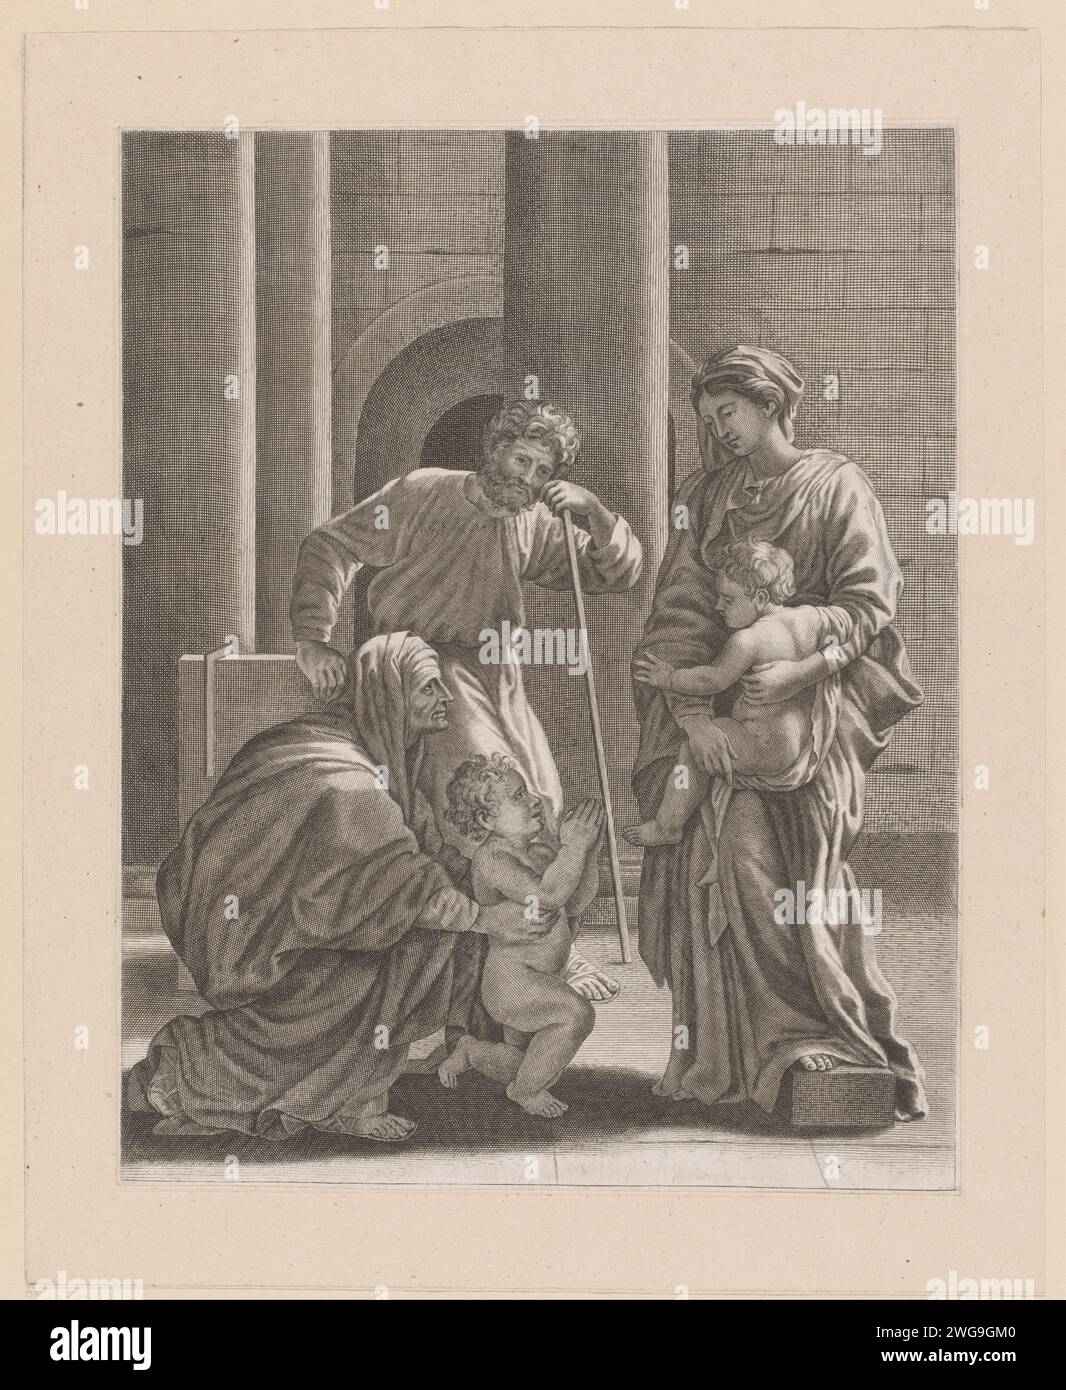 Johannes by Elisabeth introduced to Maria and Kind, Joseph watches, Anonymous, 1600 - 1699 print  France paper engraving Holy Family with John the Baptist, Elisabeth present Stock Photo